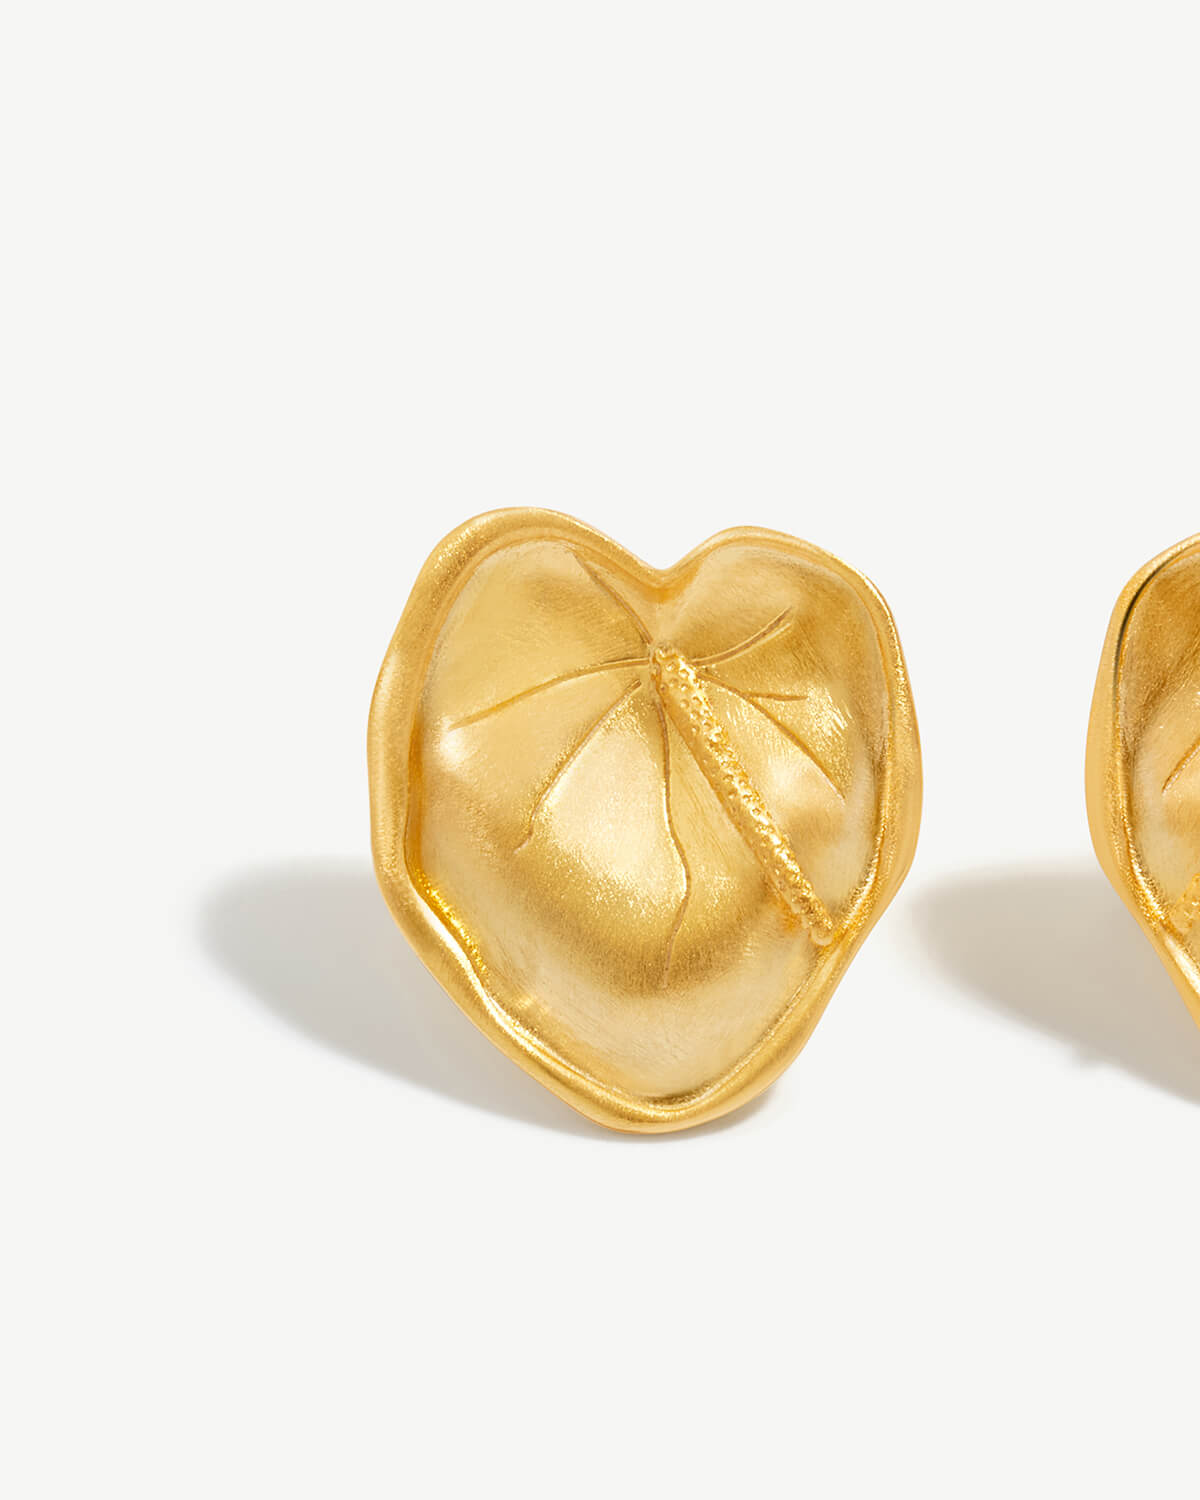 a pair of gold heart shaped earrings on a white background